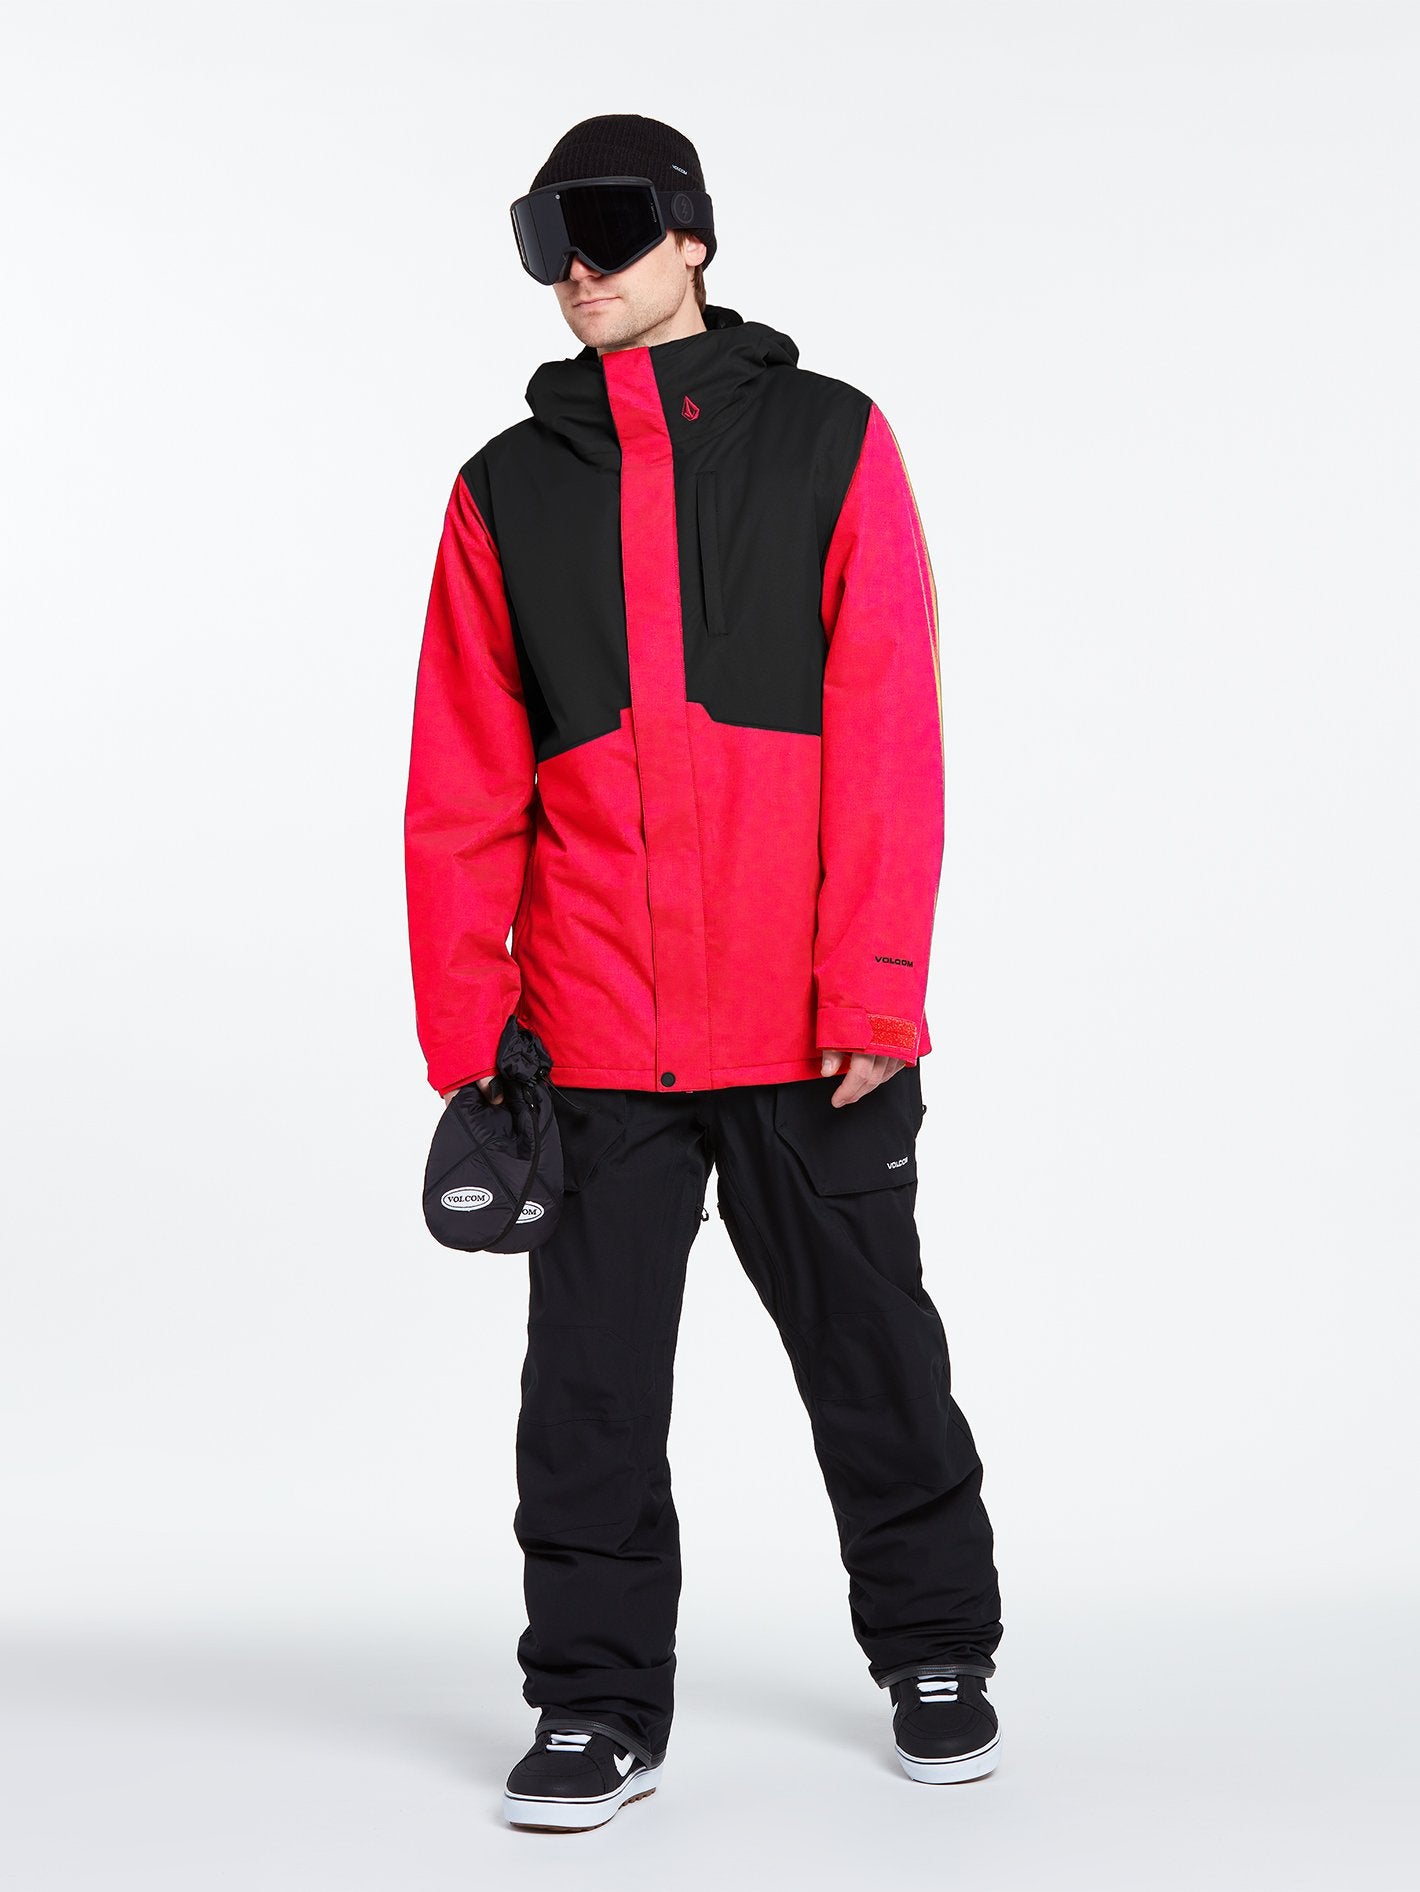 17FORTY INS JACKET - RED COMBO (G0452114_RDC) [4]